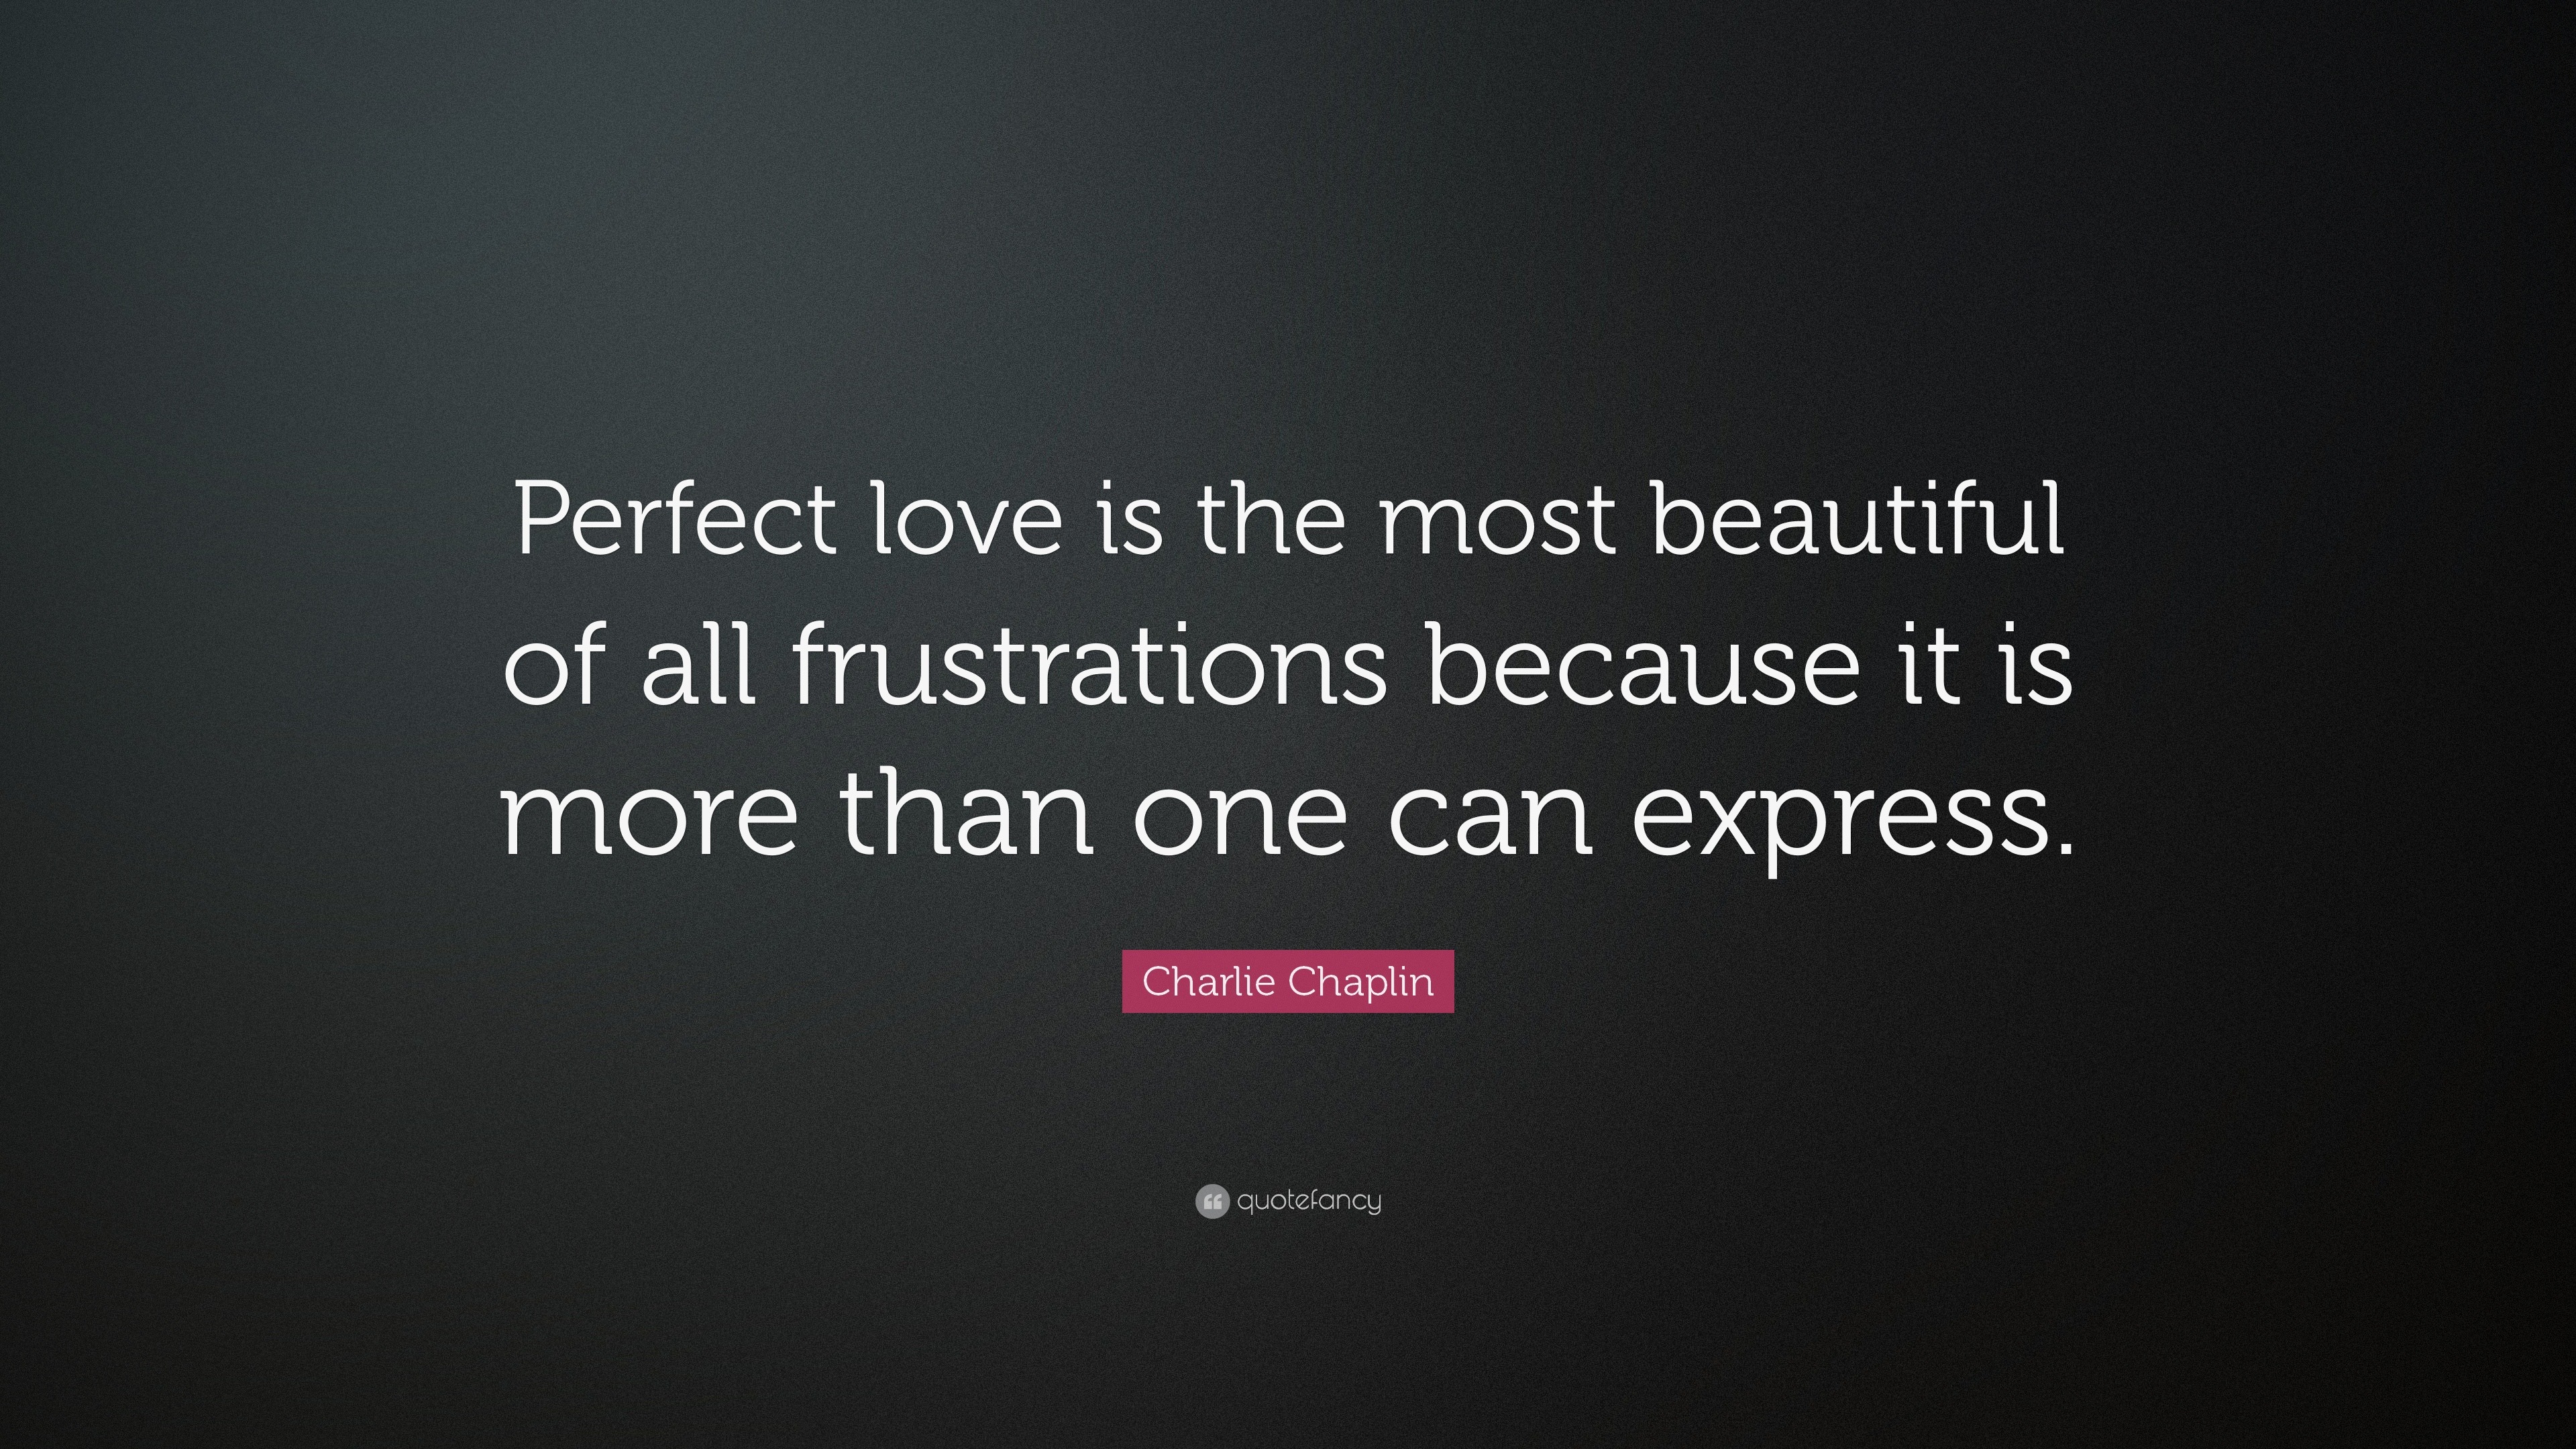 Charlie Chaplin Quote: “Perfect love is the most beautiful of all